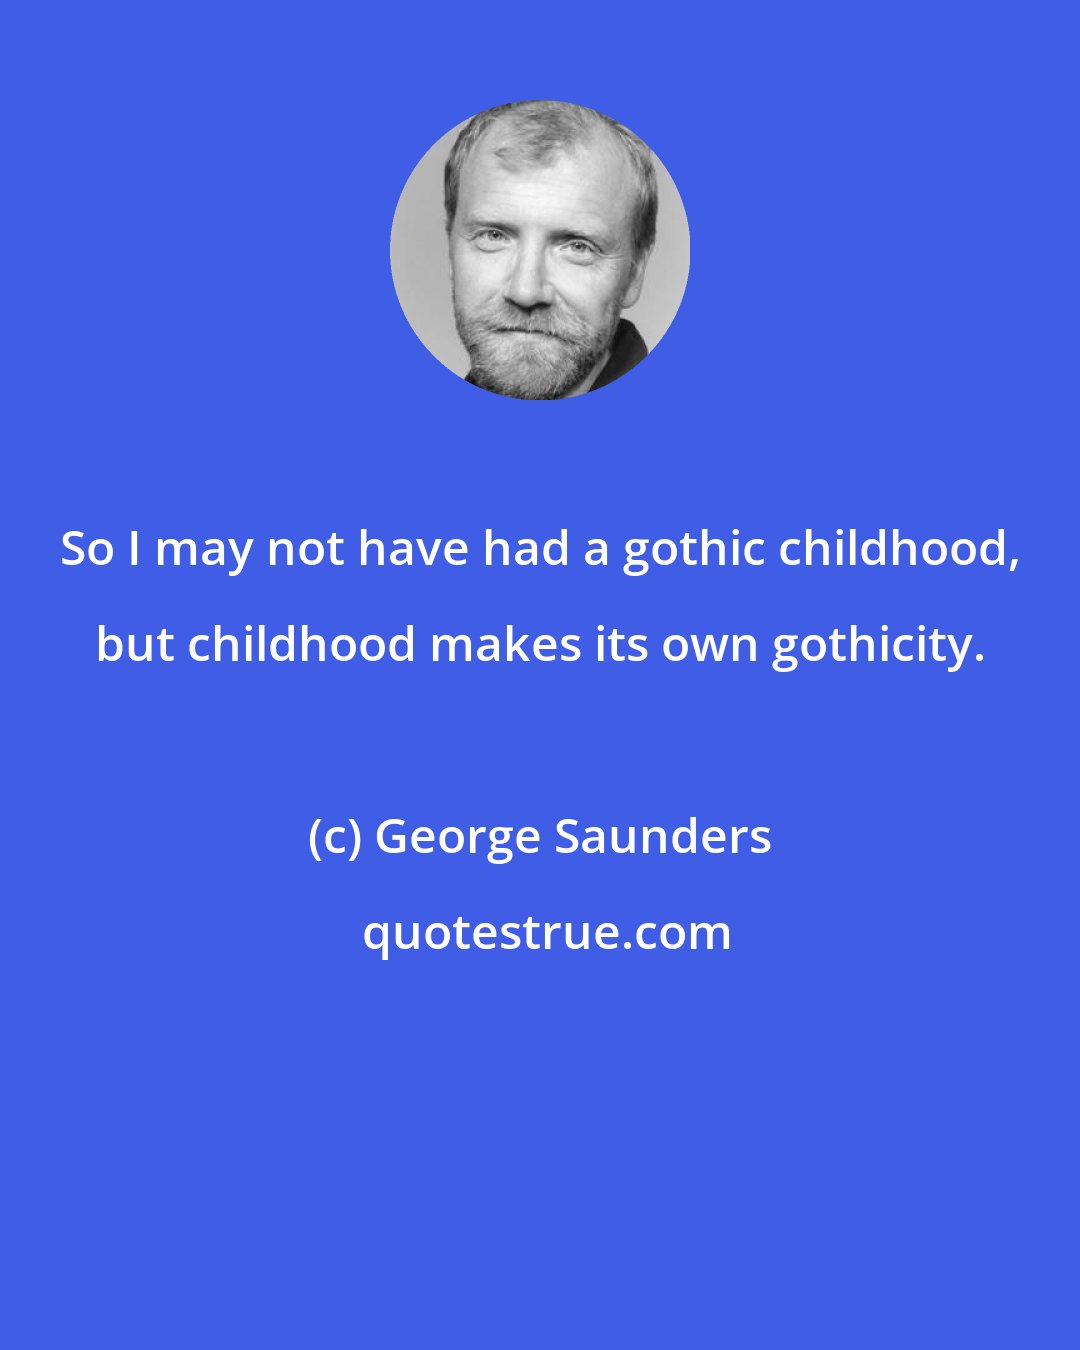 George Saunders: So I may not have had a gothic childhood, but childhood makes its own gothicity.